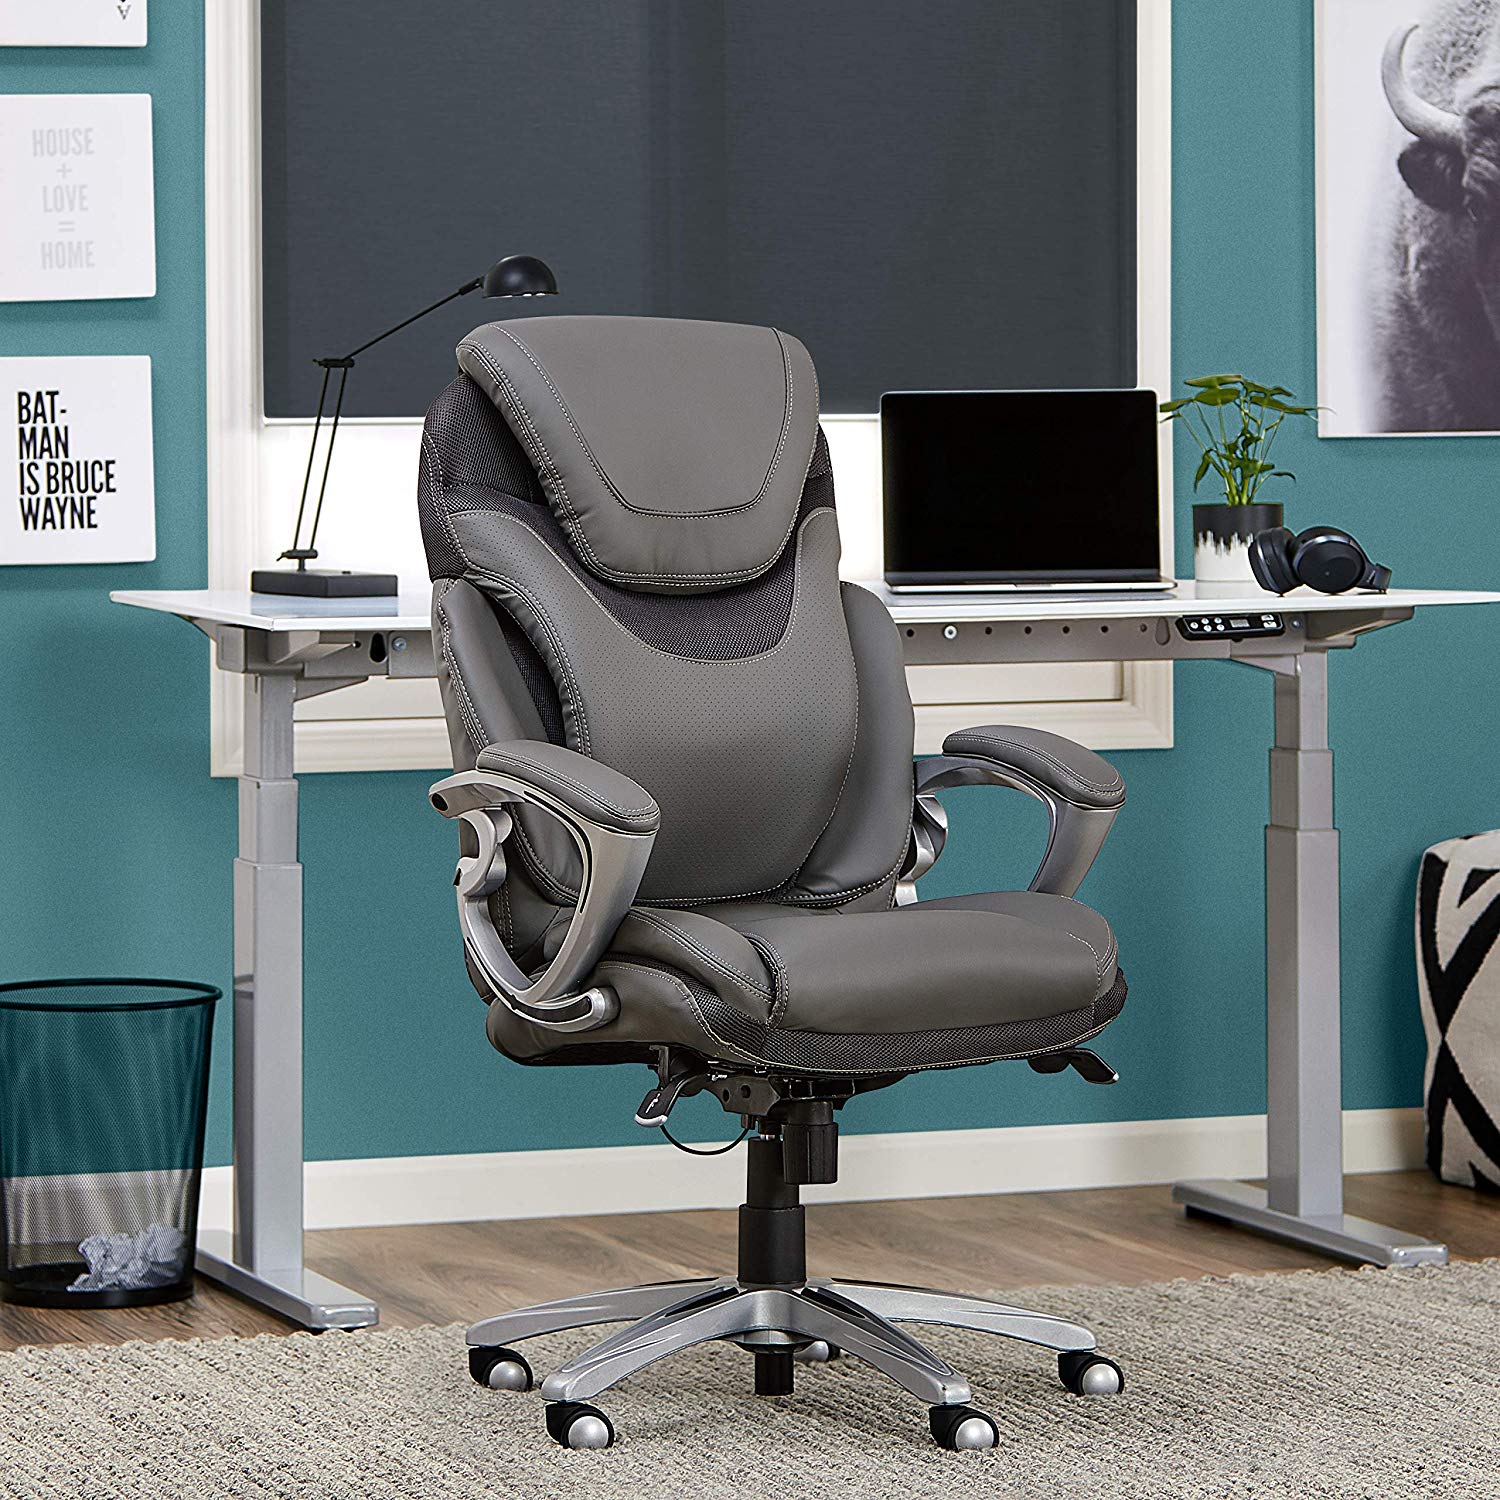 Top 10 Best Executive Chairs to Buy In 2022 | Comfortable and Relaxable